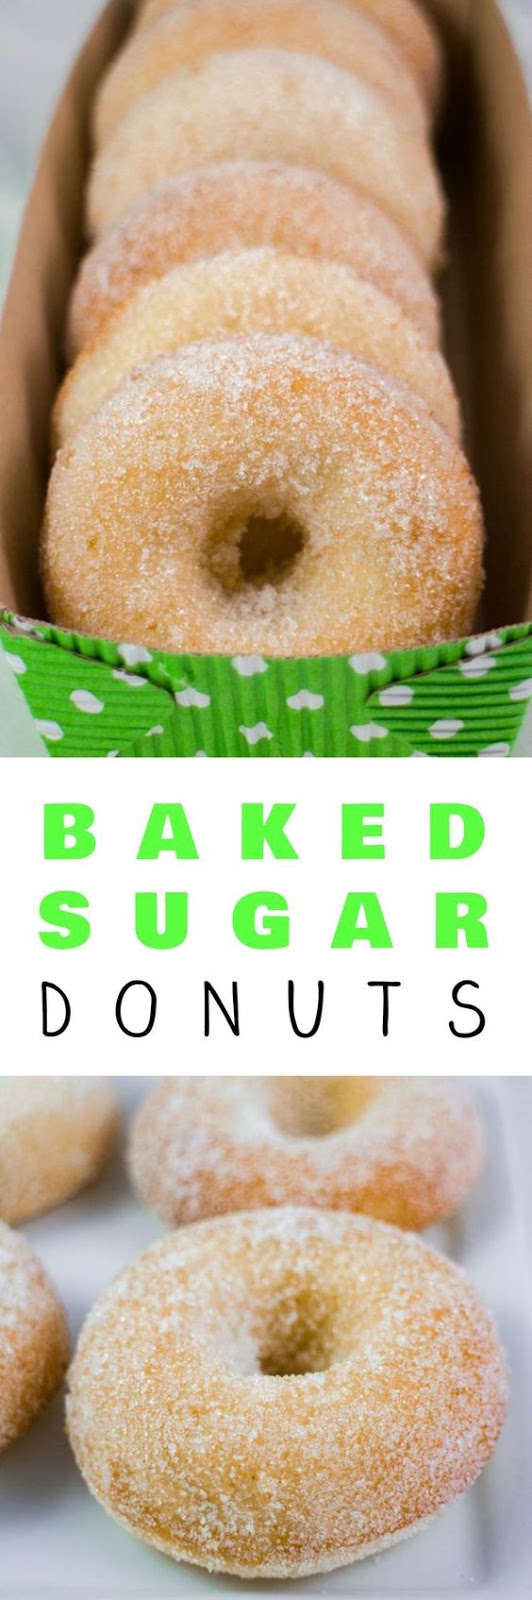 This Old-Fashioned Baked Donut recipe will remind you just how delicious breakfast can taste! These simple, baked donuts will give you familiar old-fashioneds without all the hassle of rolling, cutting, and frying the dough.